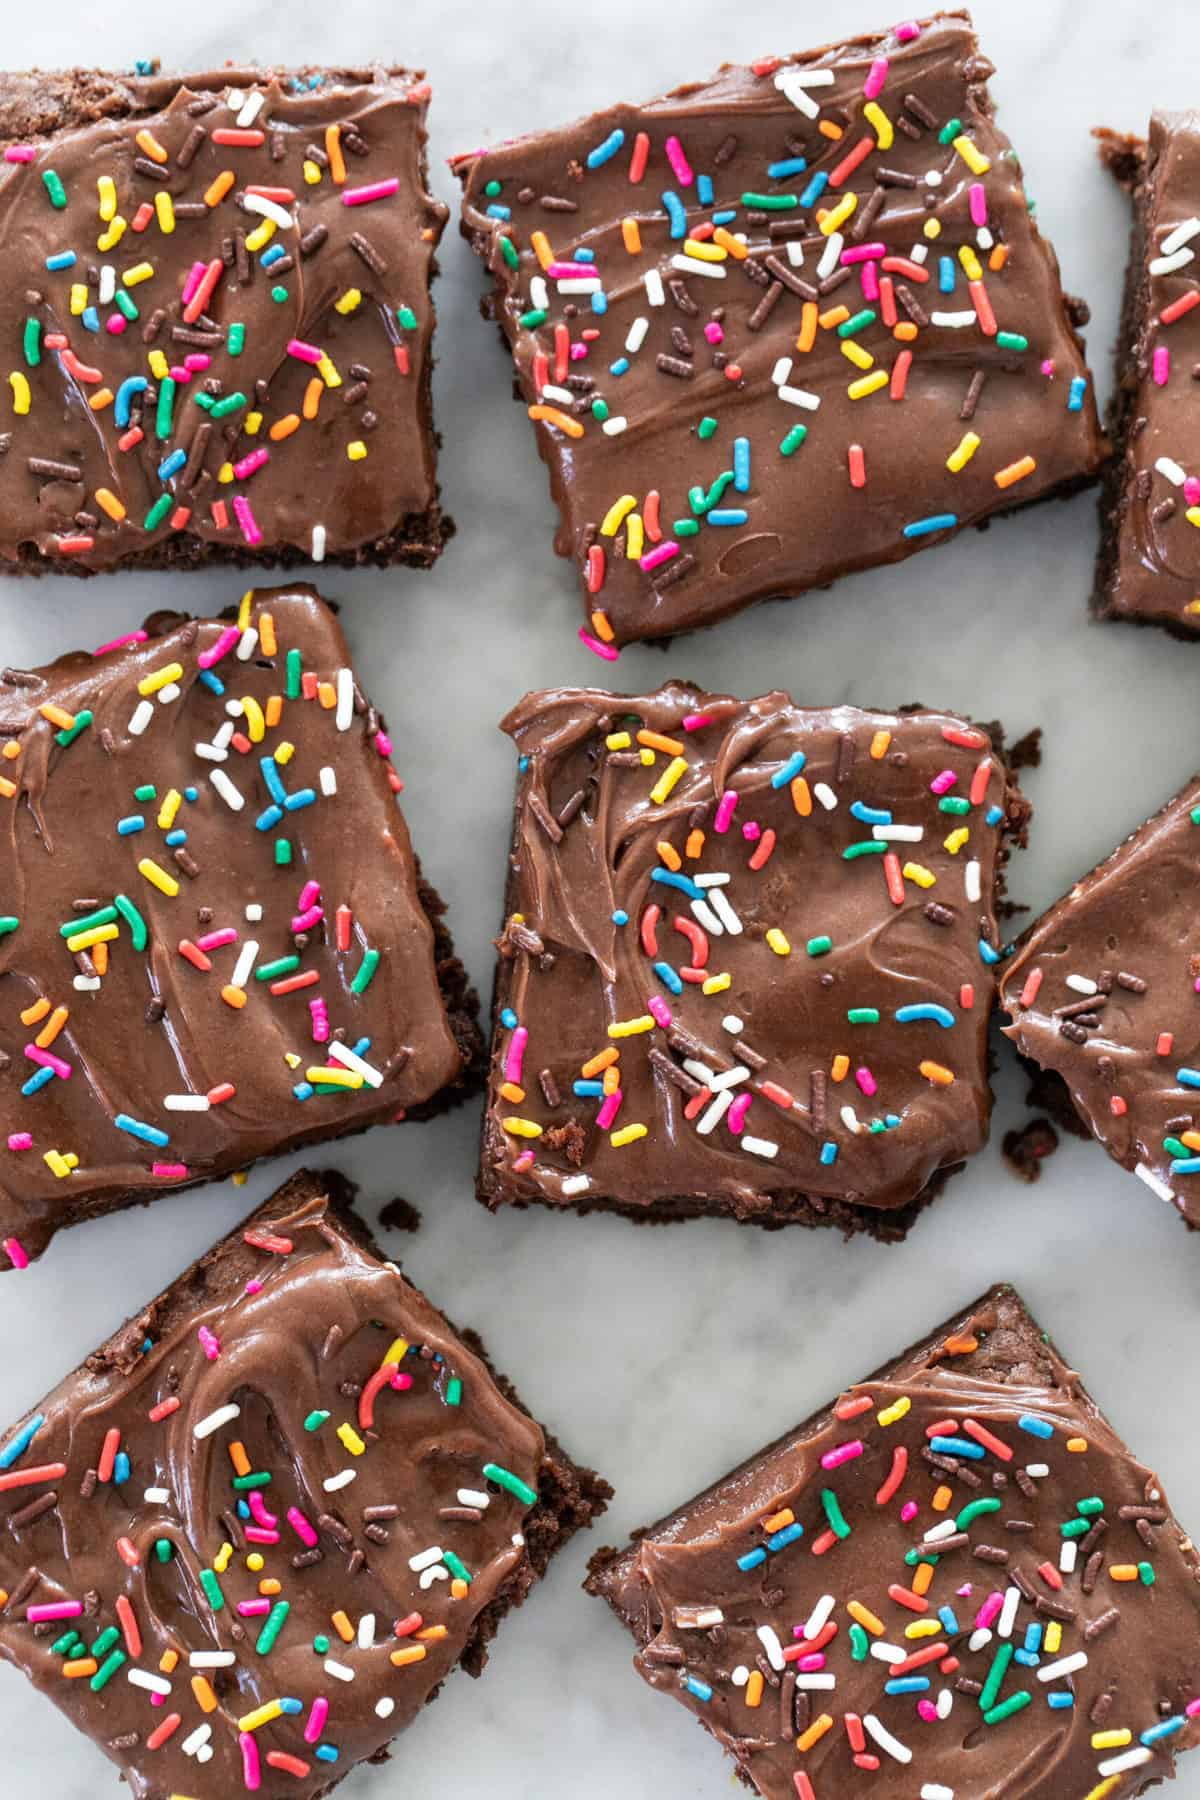 chocolate brownies with sprinkles over them.